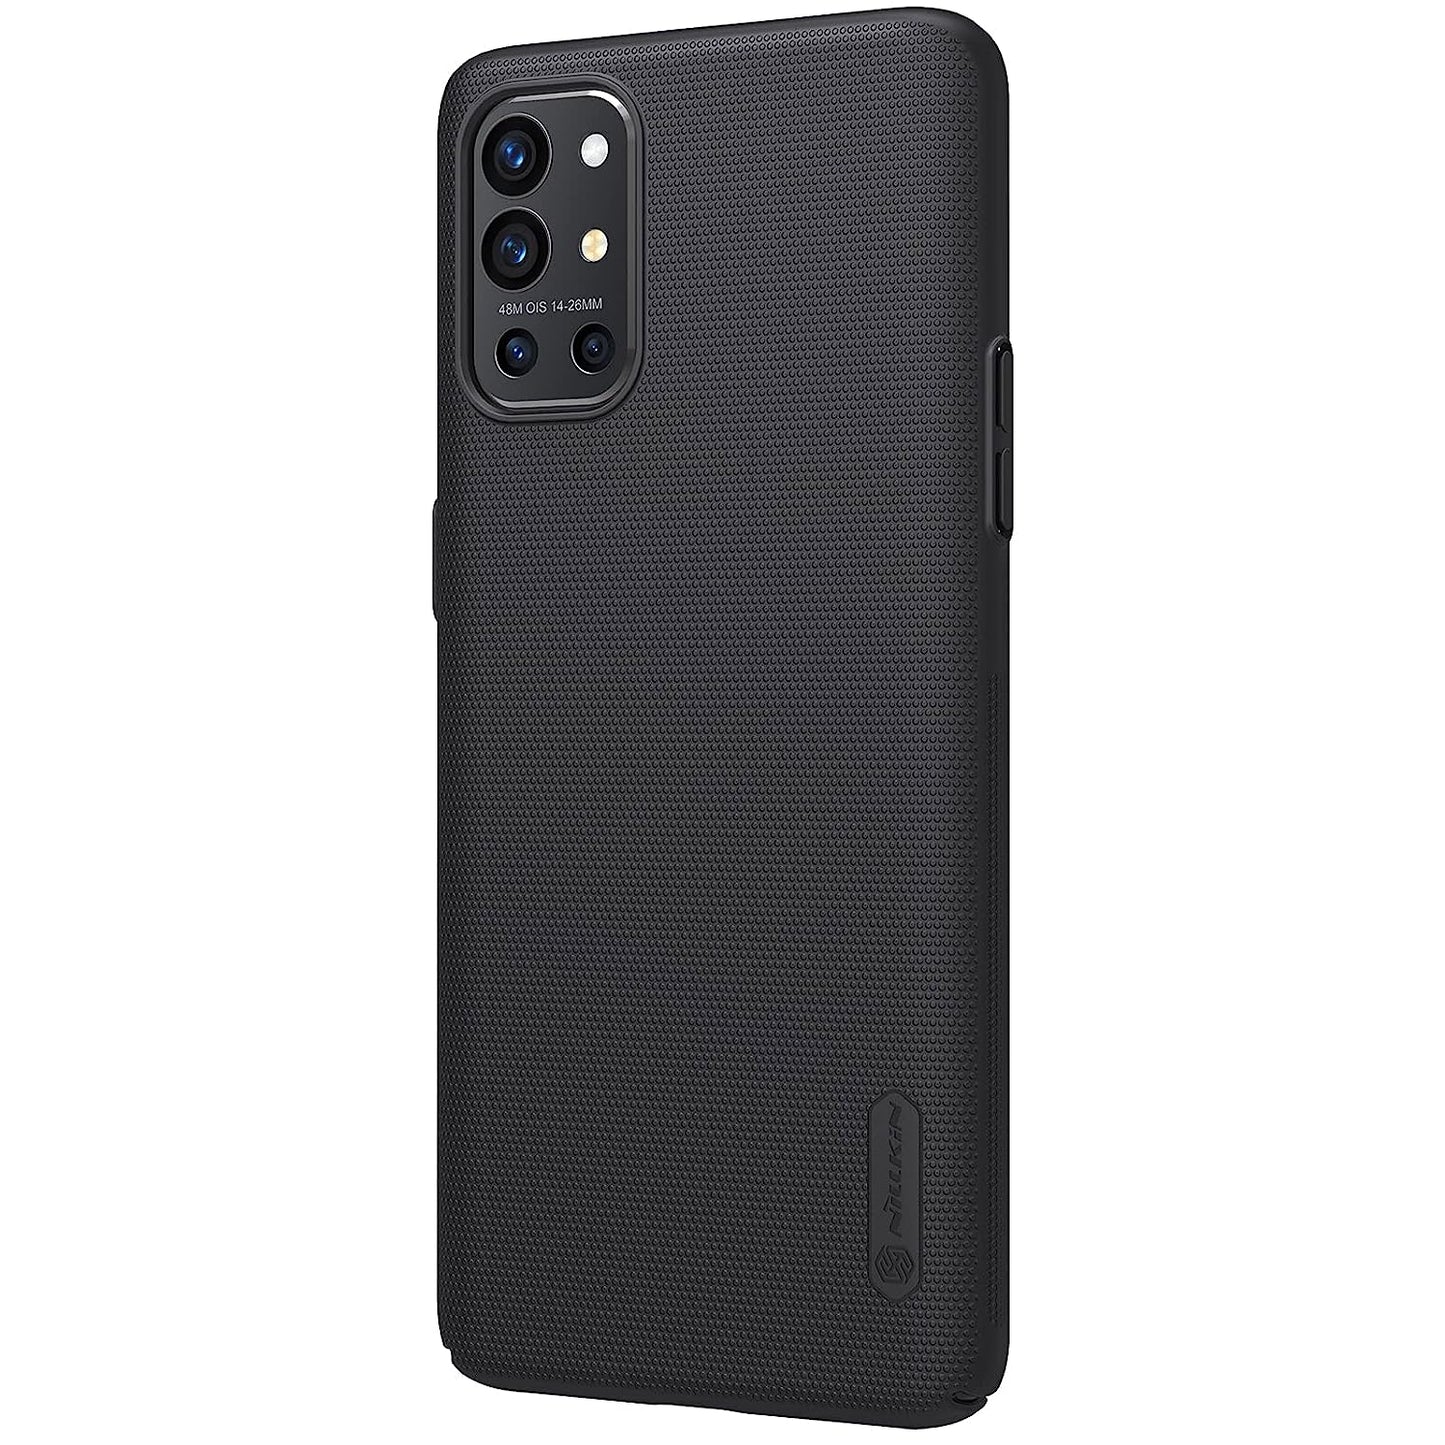 Nillkin Plastic Case For Oneplus 9R One Plus 9R (1+9) R (6.55" Inch) Super Frosted Hard Back Cover Pc Black Color